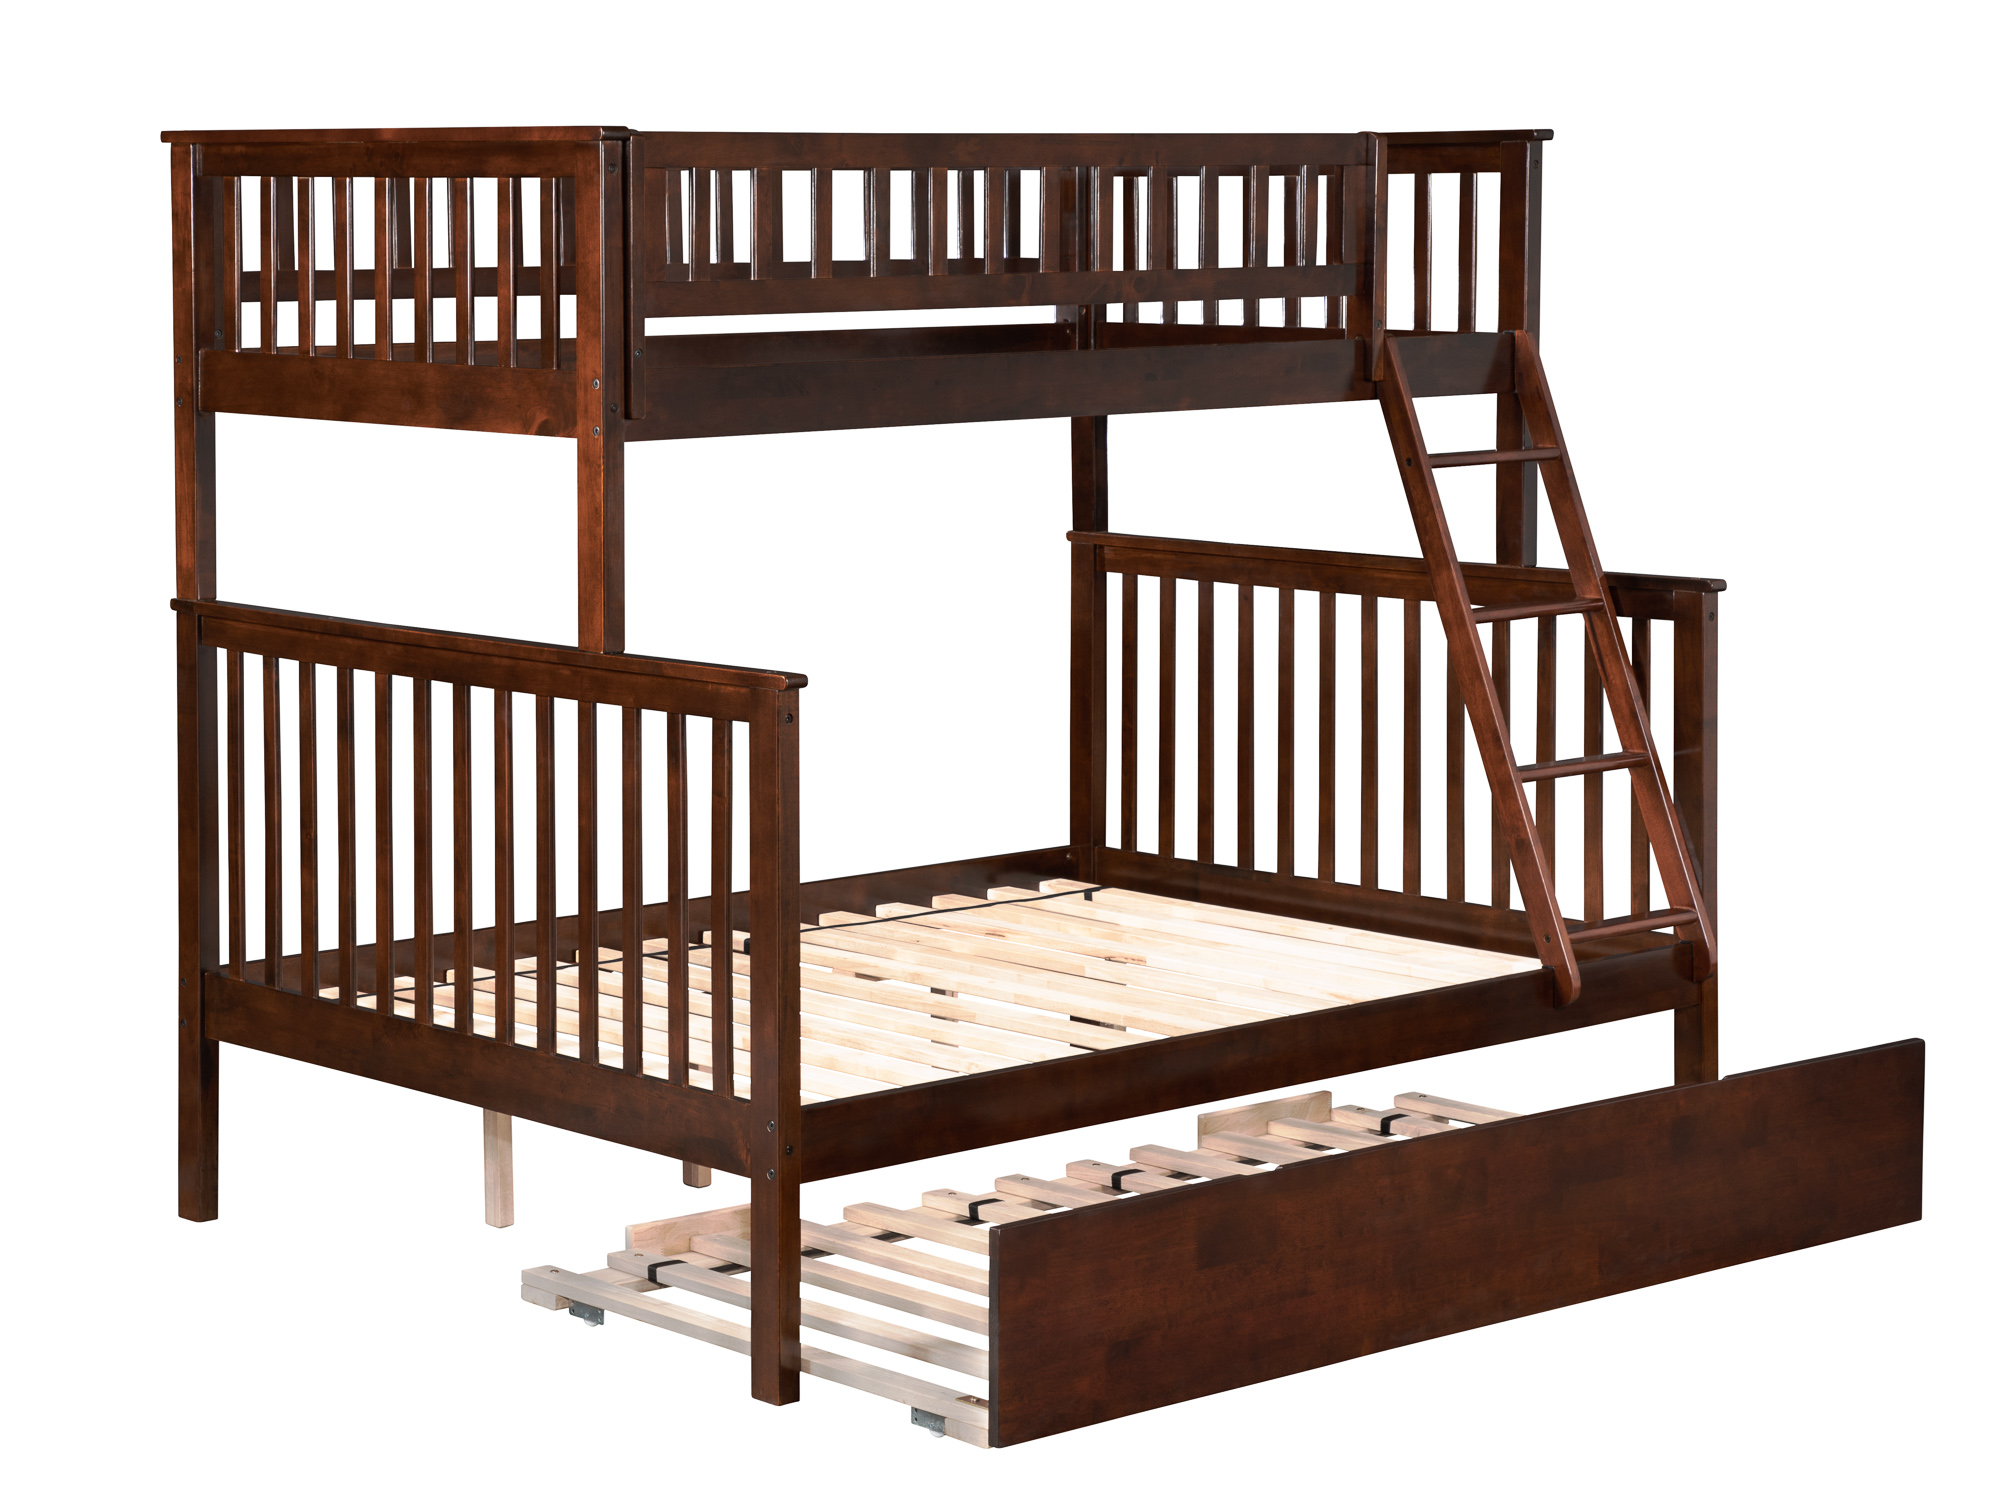 Woodland Bunk Bed Twin over Full with Full Size Urban Trundle Bed in Walnut - image 1 of 7